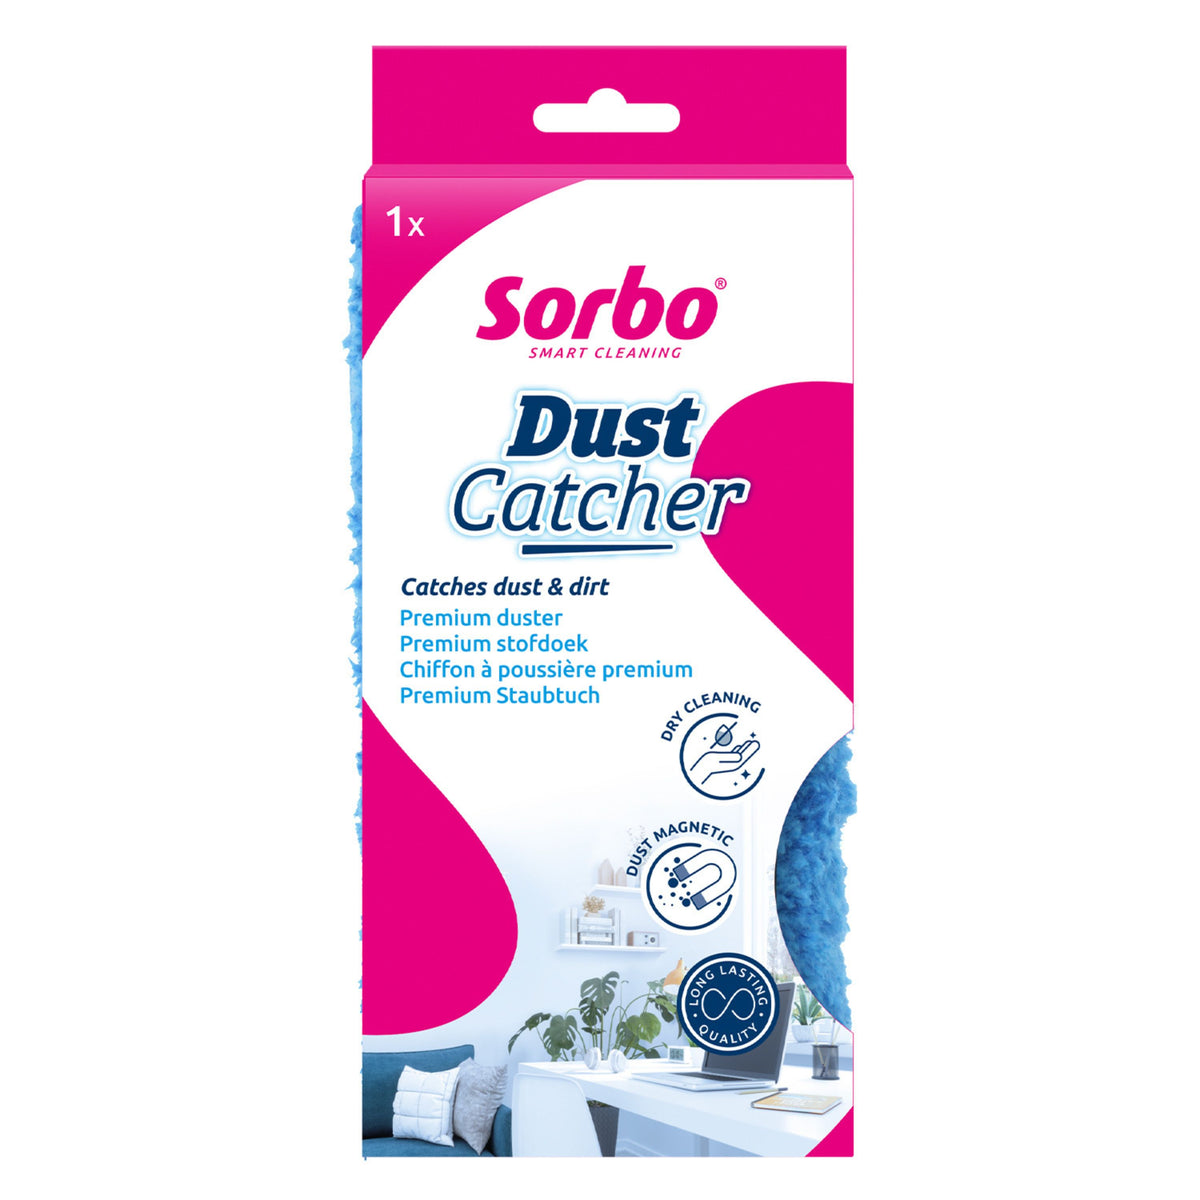 Sorbo Dust Catcher – Dayes